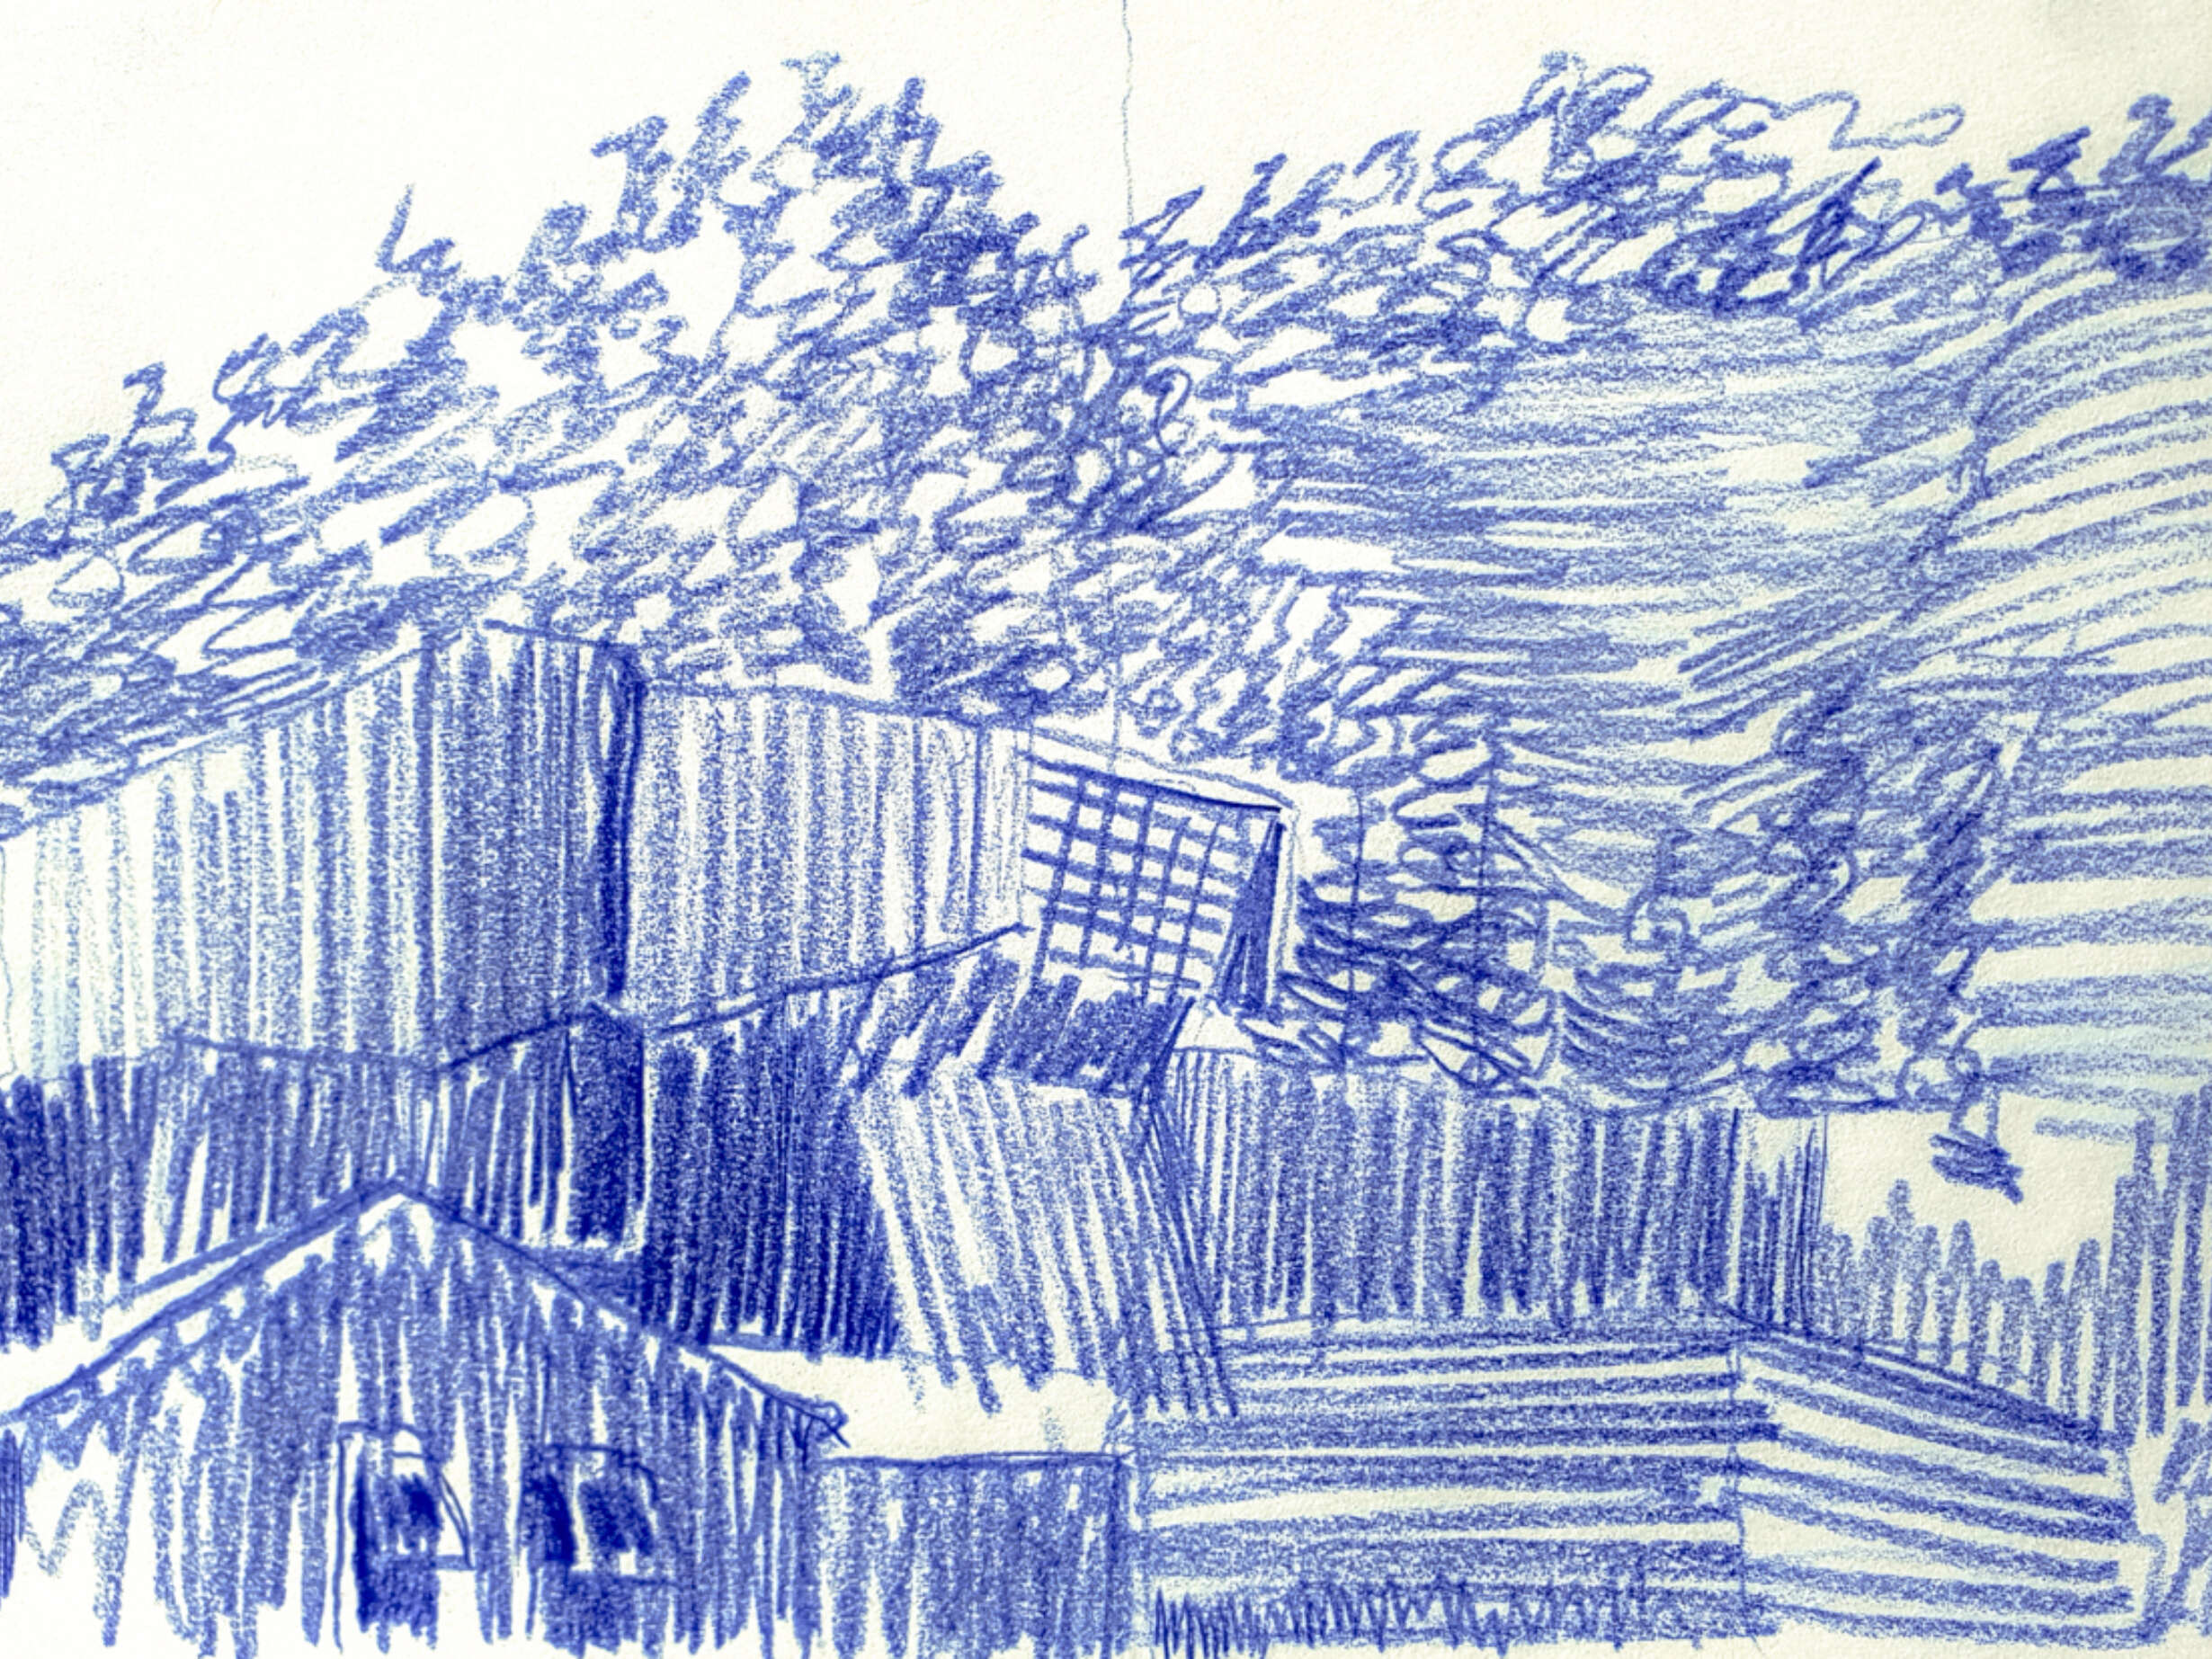 1A - Perceptions of the Plein-Air [30 Minutes, Blue Pencil in 254 x 177mm Sketchbook]